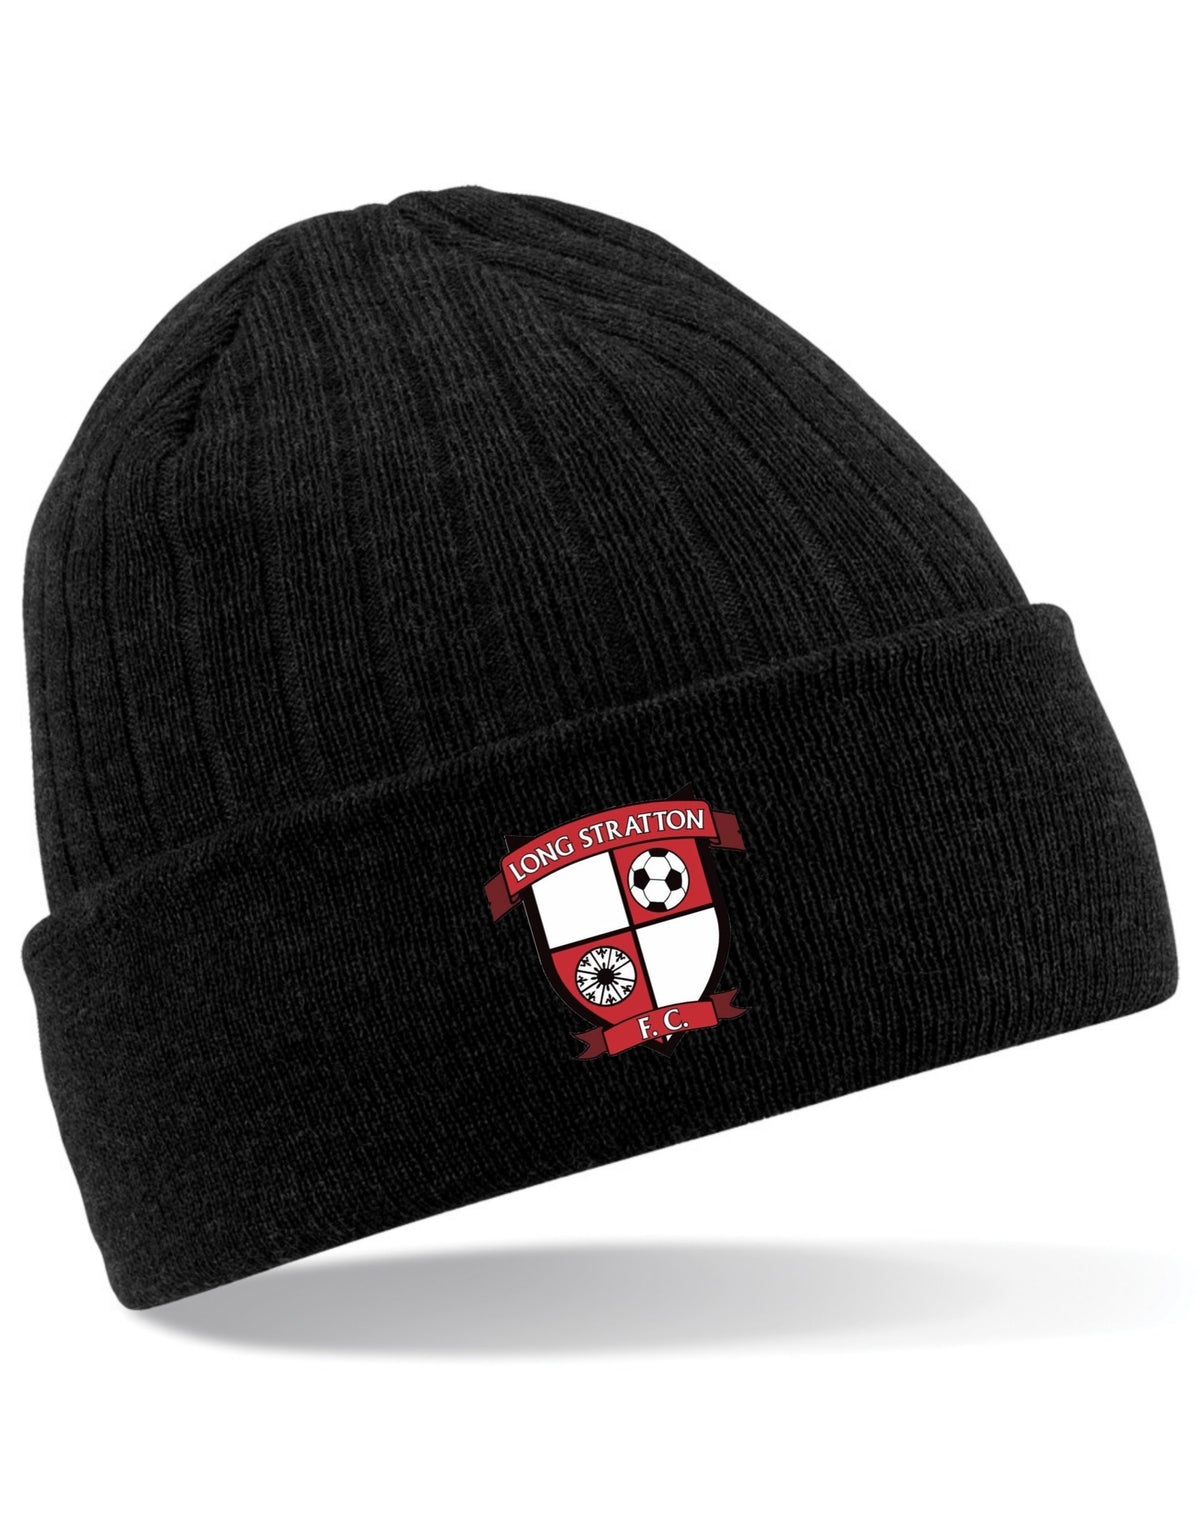 Long Stratton FC Winter Beanie in Adult